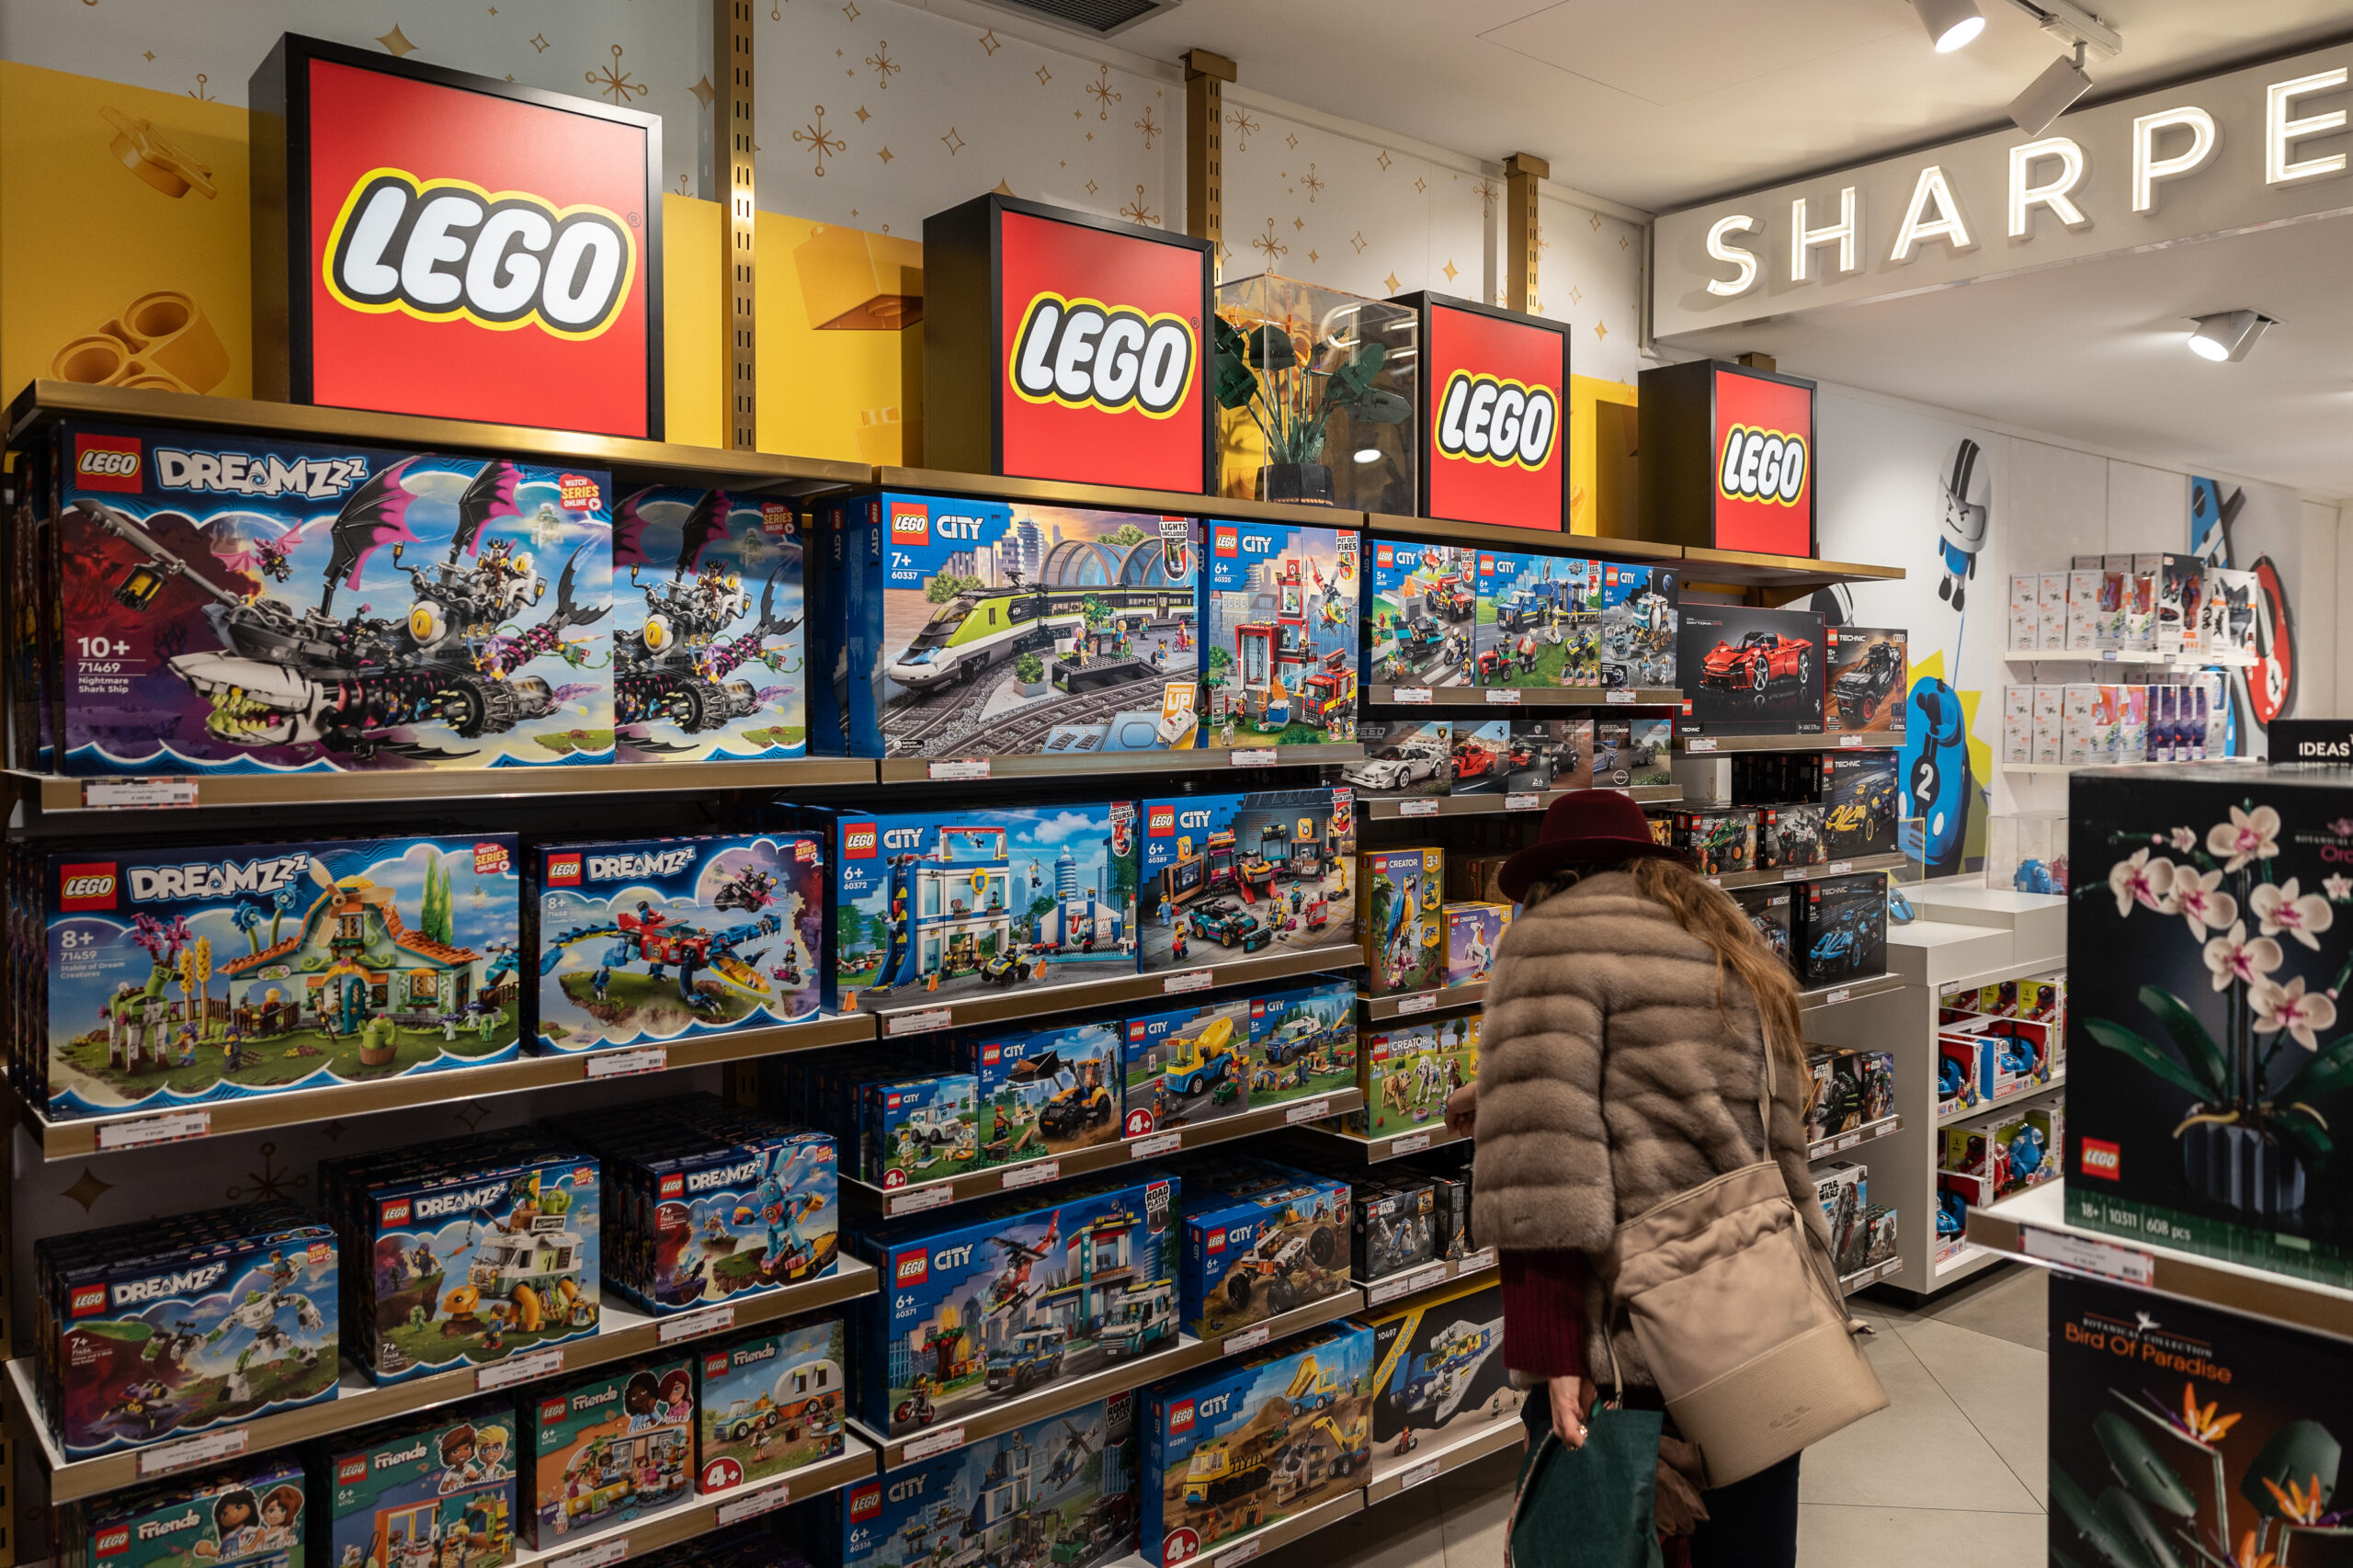 California police detained 4 suspects and seized 0,000 worth of stolen Legos by dismantling a retail theft operation